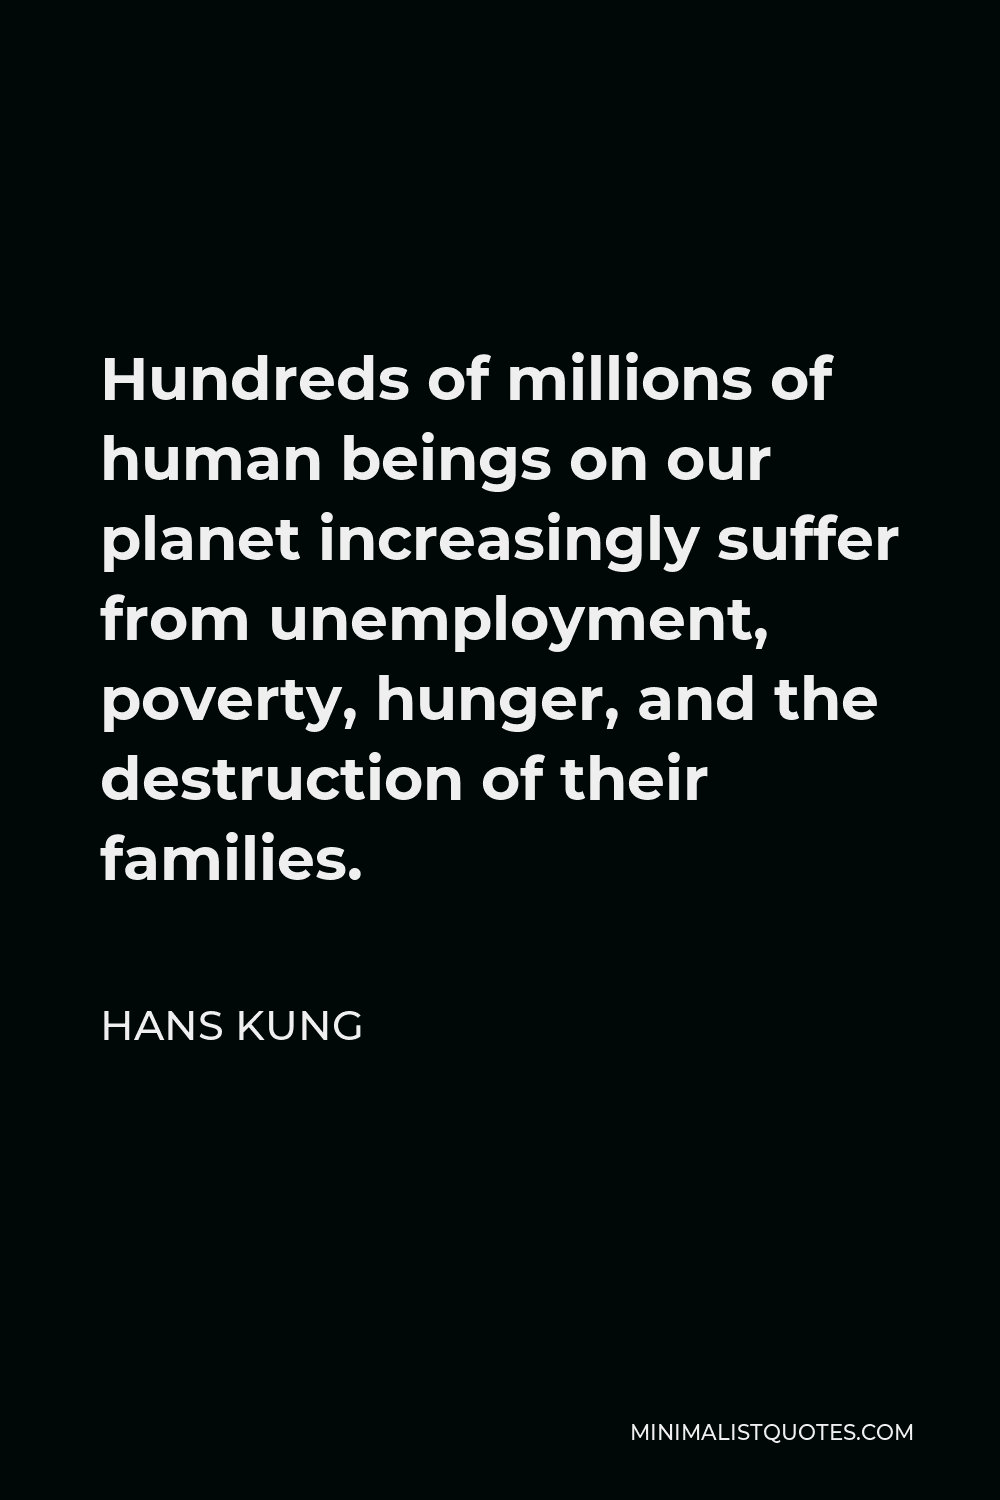 Hans Kung Quote - Hundreds of millions of human beings on our planet increasingly suffer from unemployment, poverty, hunger, and the destruction of their families.